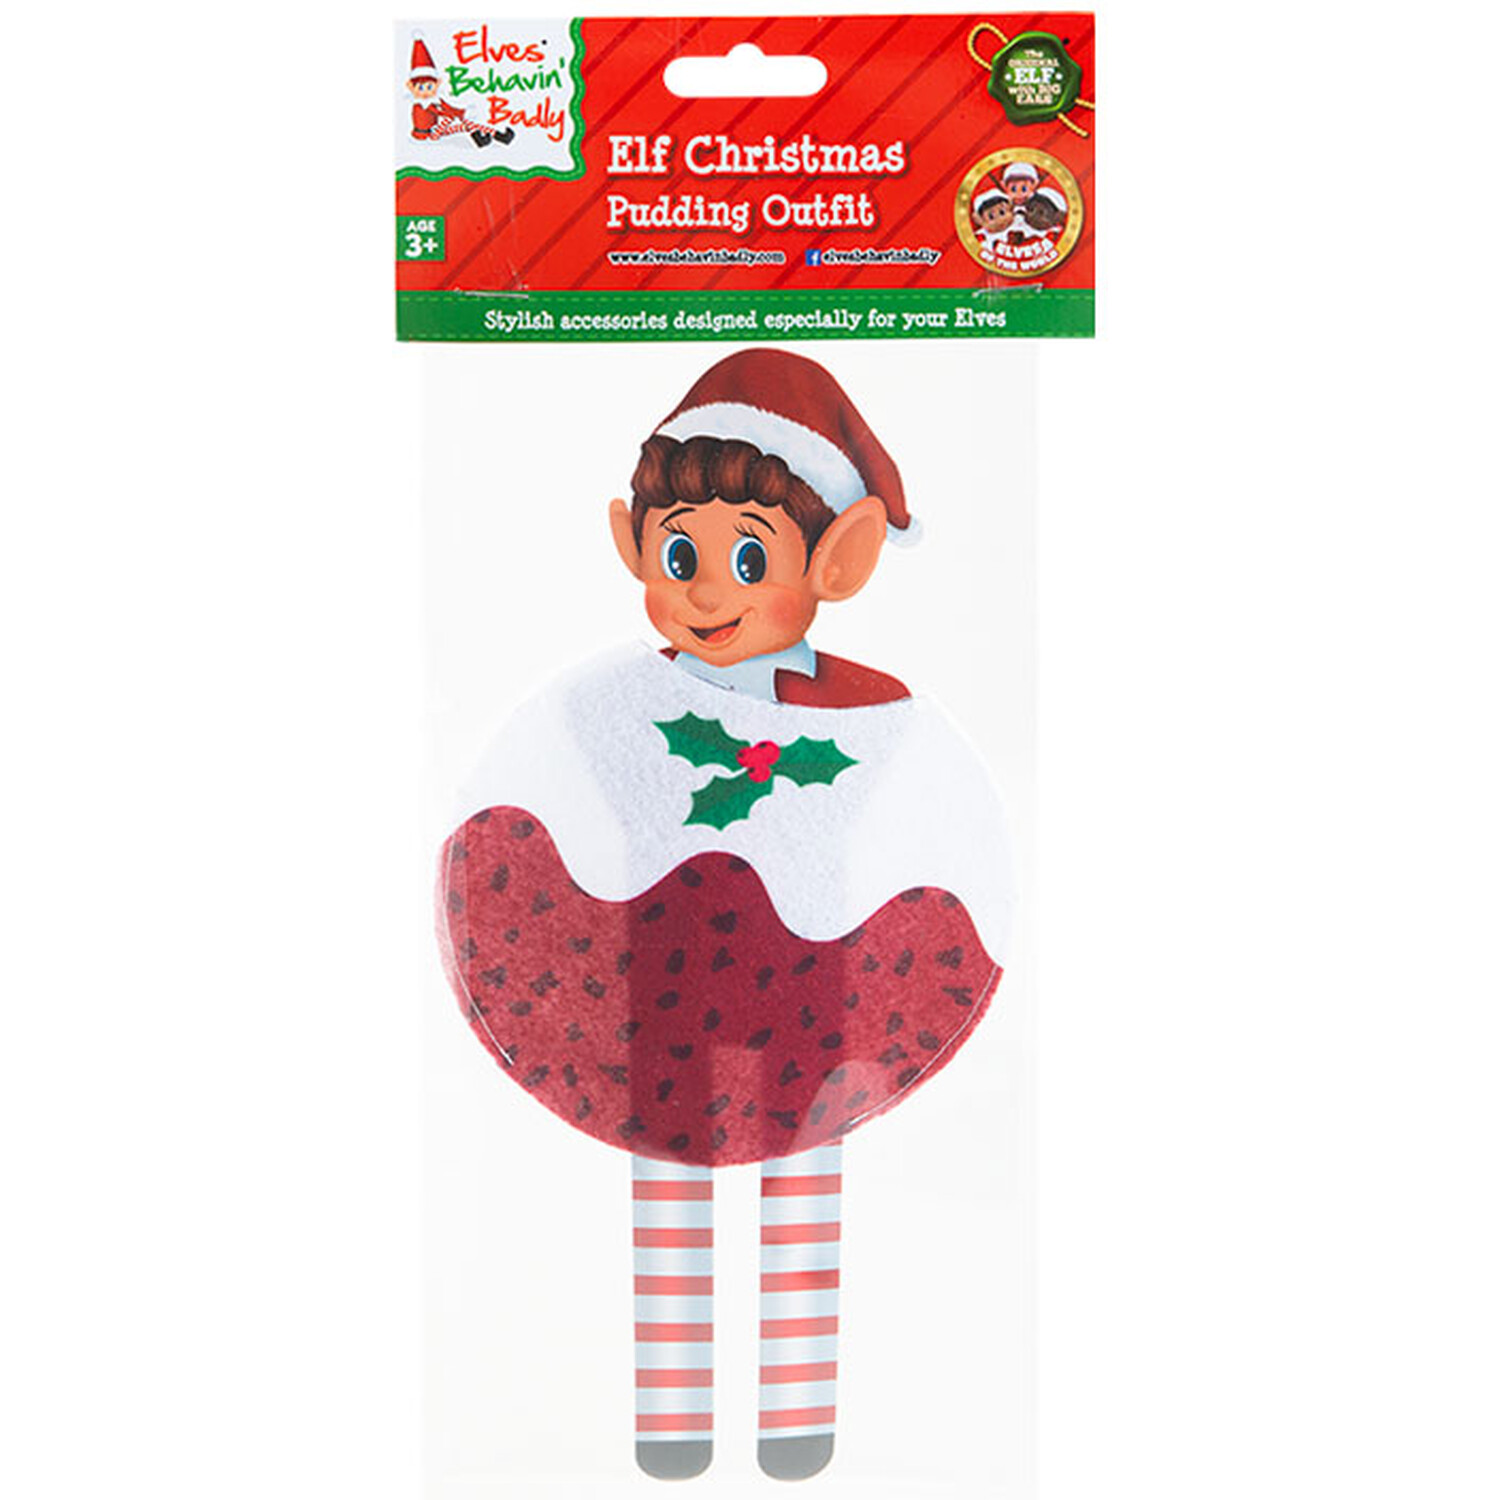 Elf Christmas Pudding Outfit - Red Image